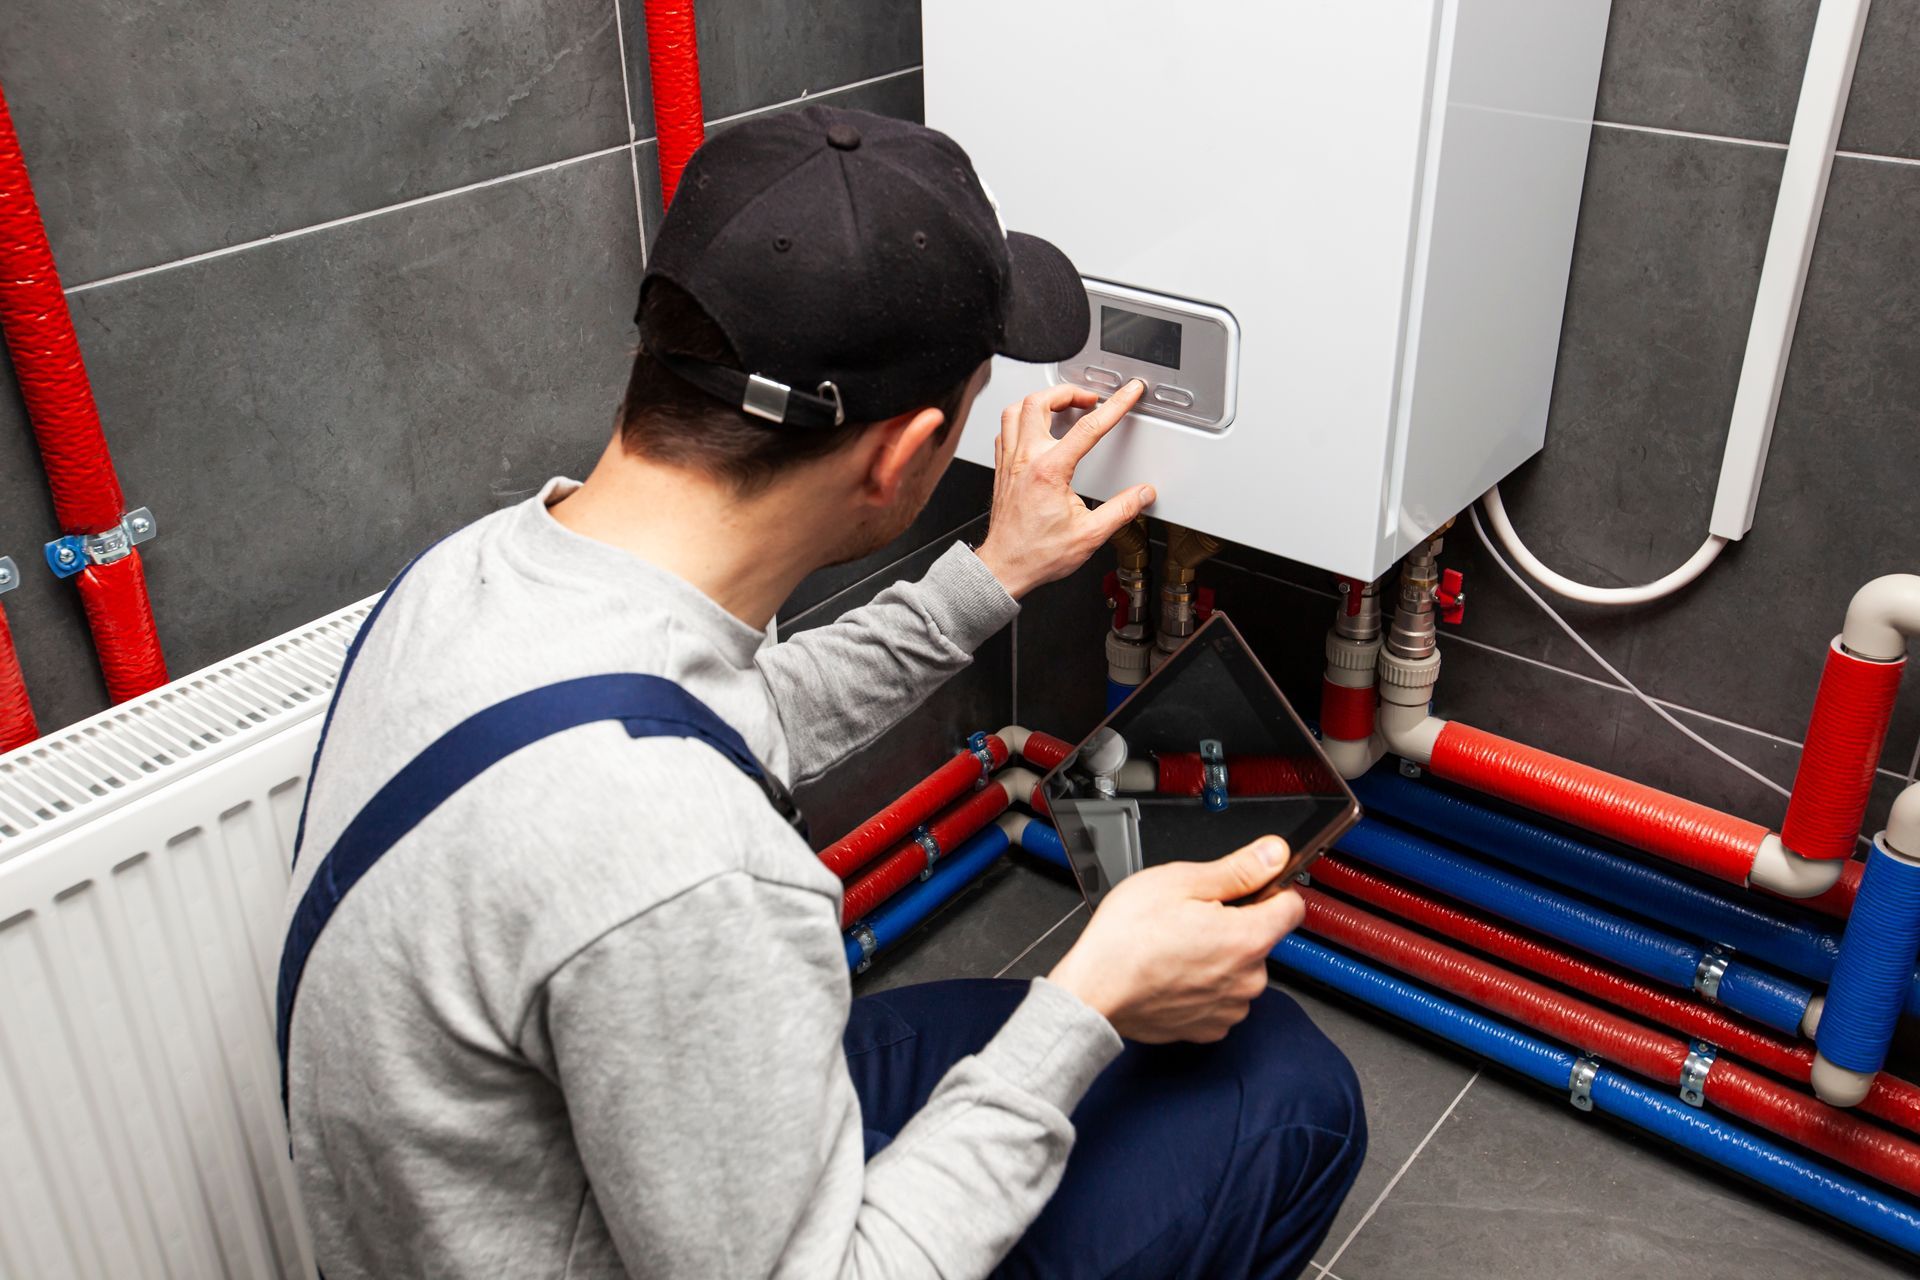 A man is kneeling down in front of a boiler and looking at a tablet